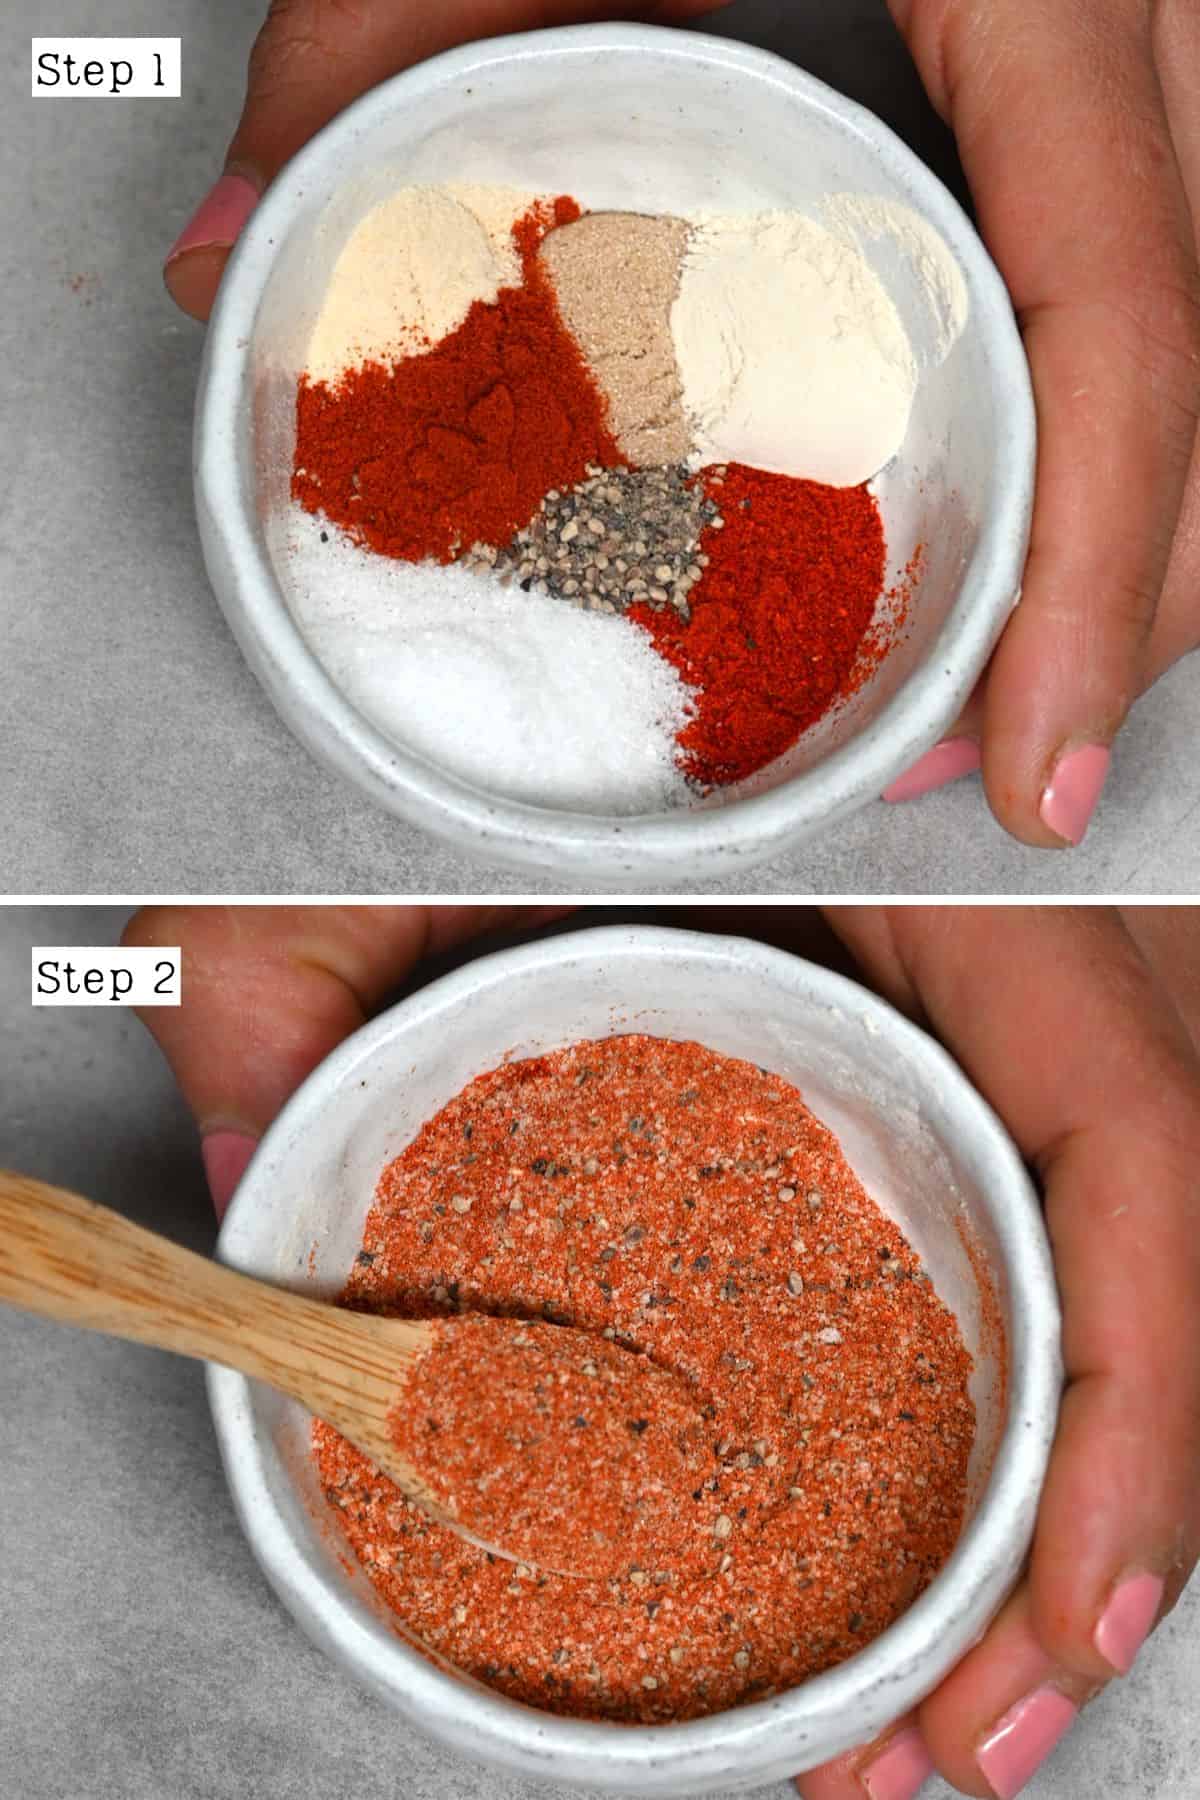 Steps for mixing spices